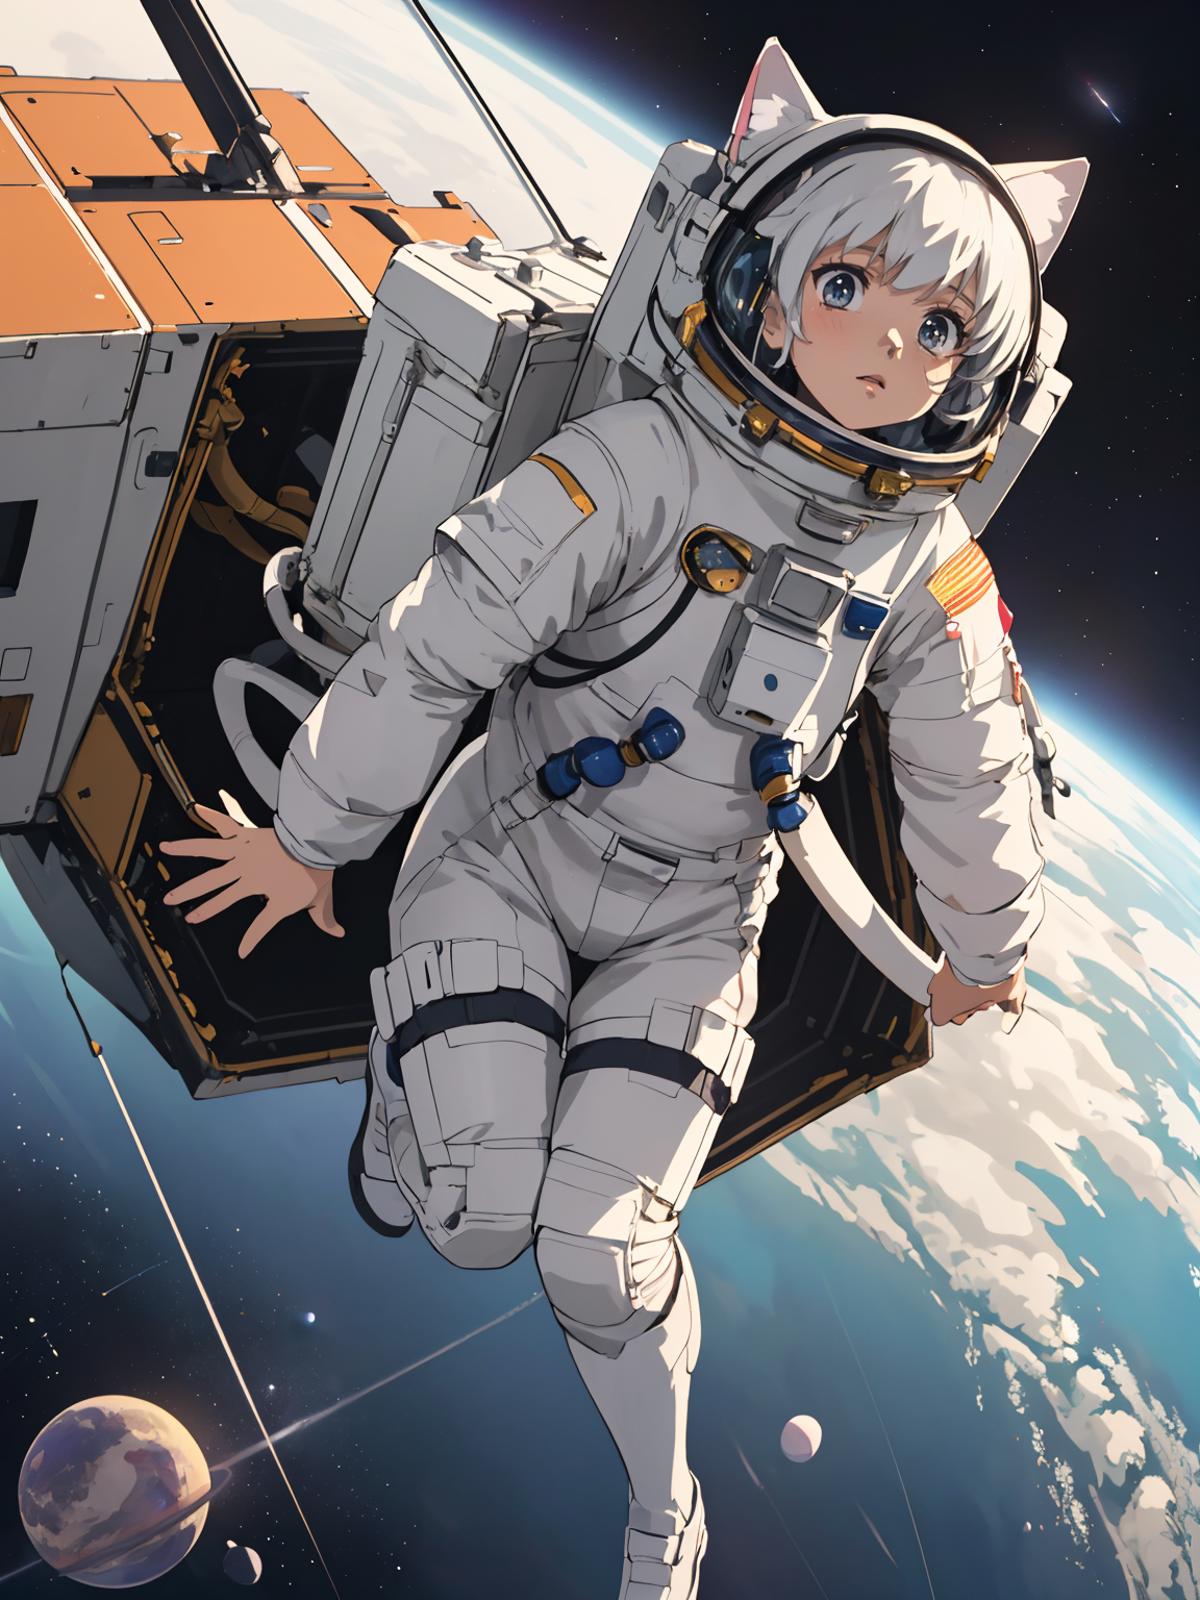 A cartoon character in a white astronaut suit is shown on a space shuttle.